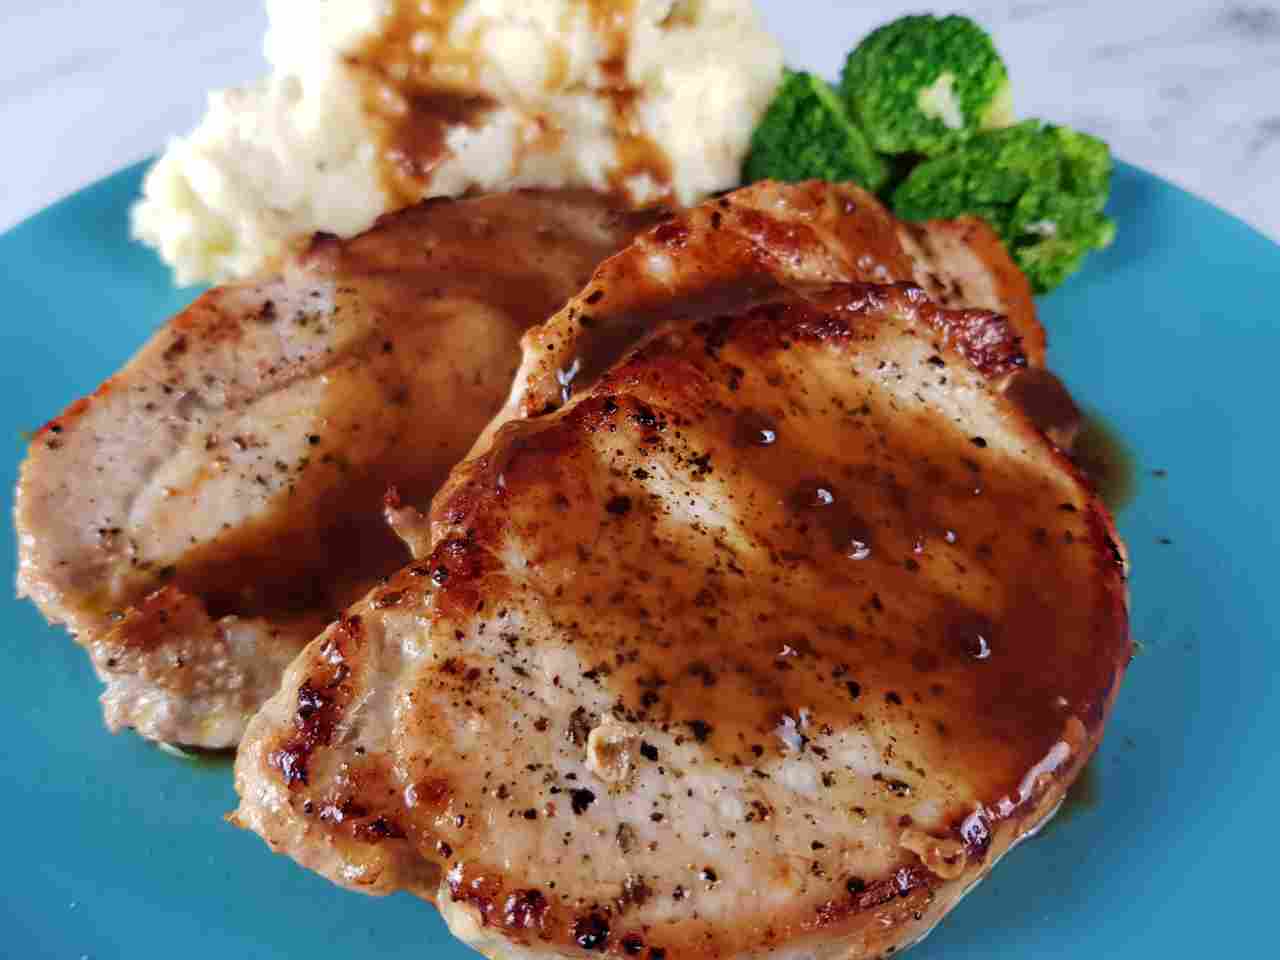 Pork loin steaks with gravy, mashed potatoes and broccoli on a blue plate.